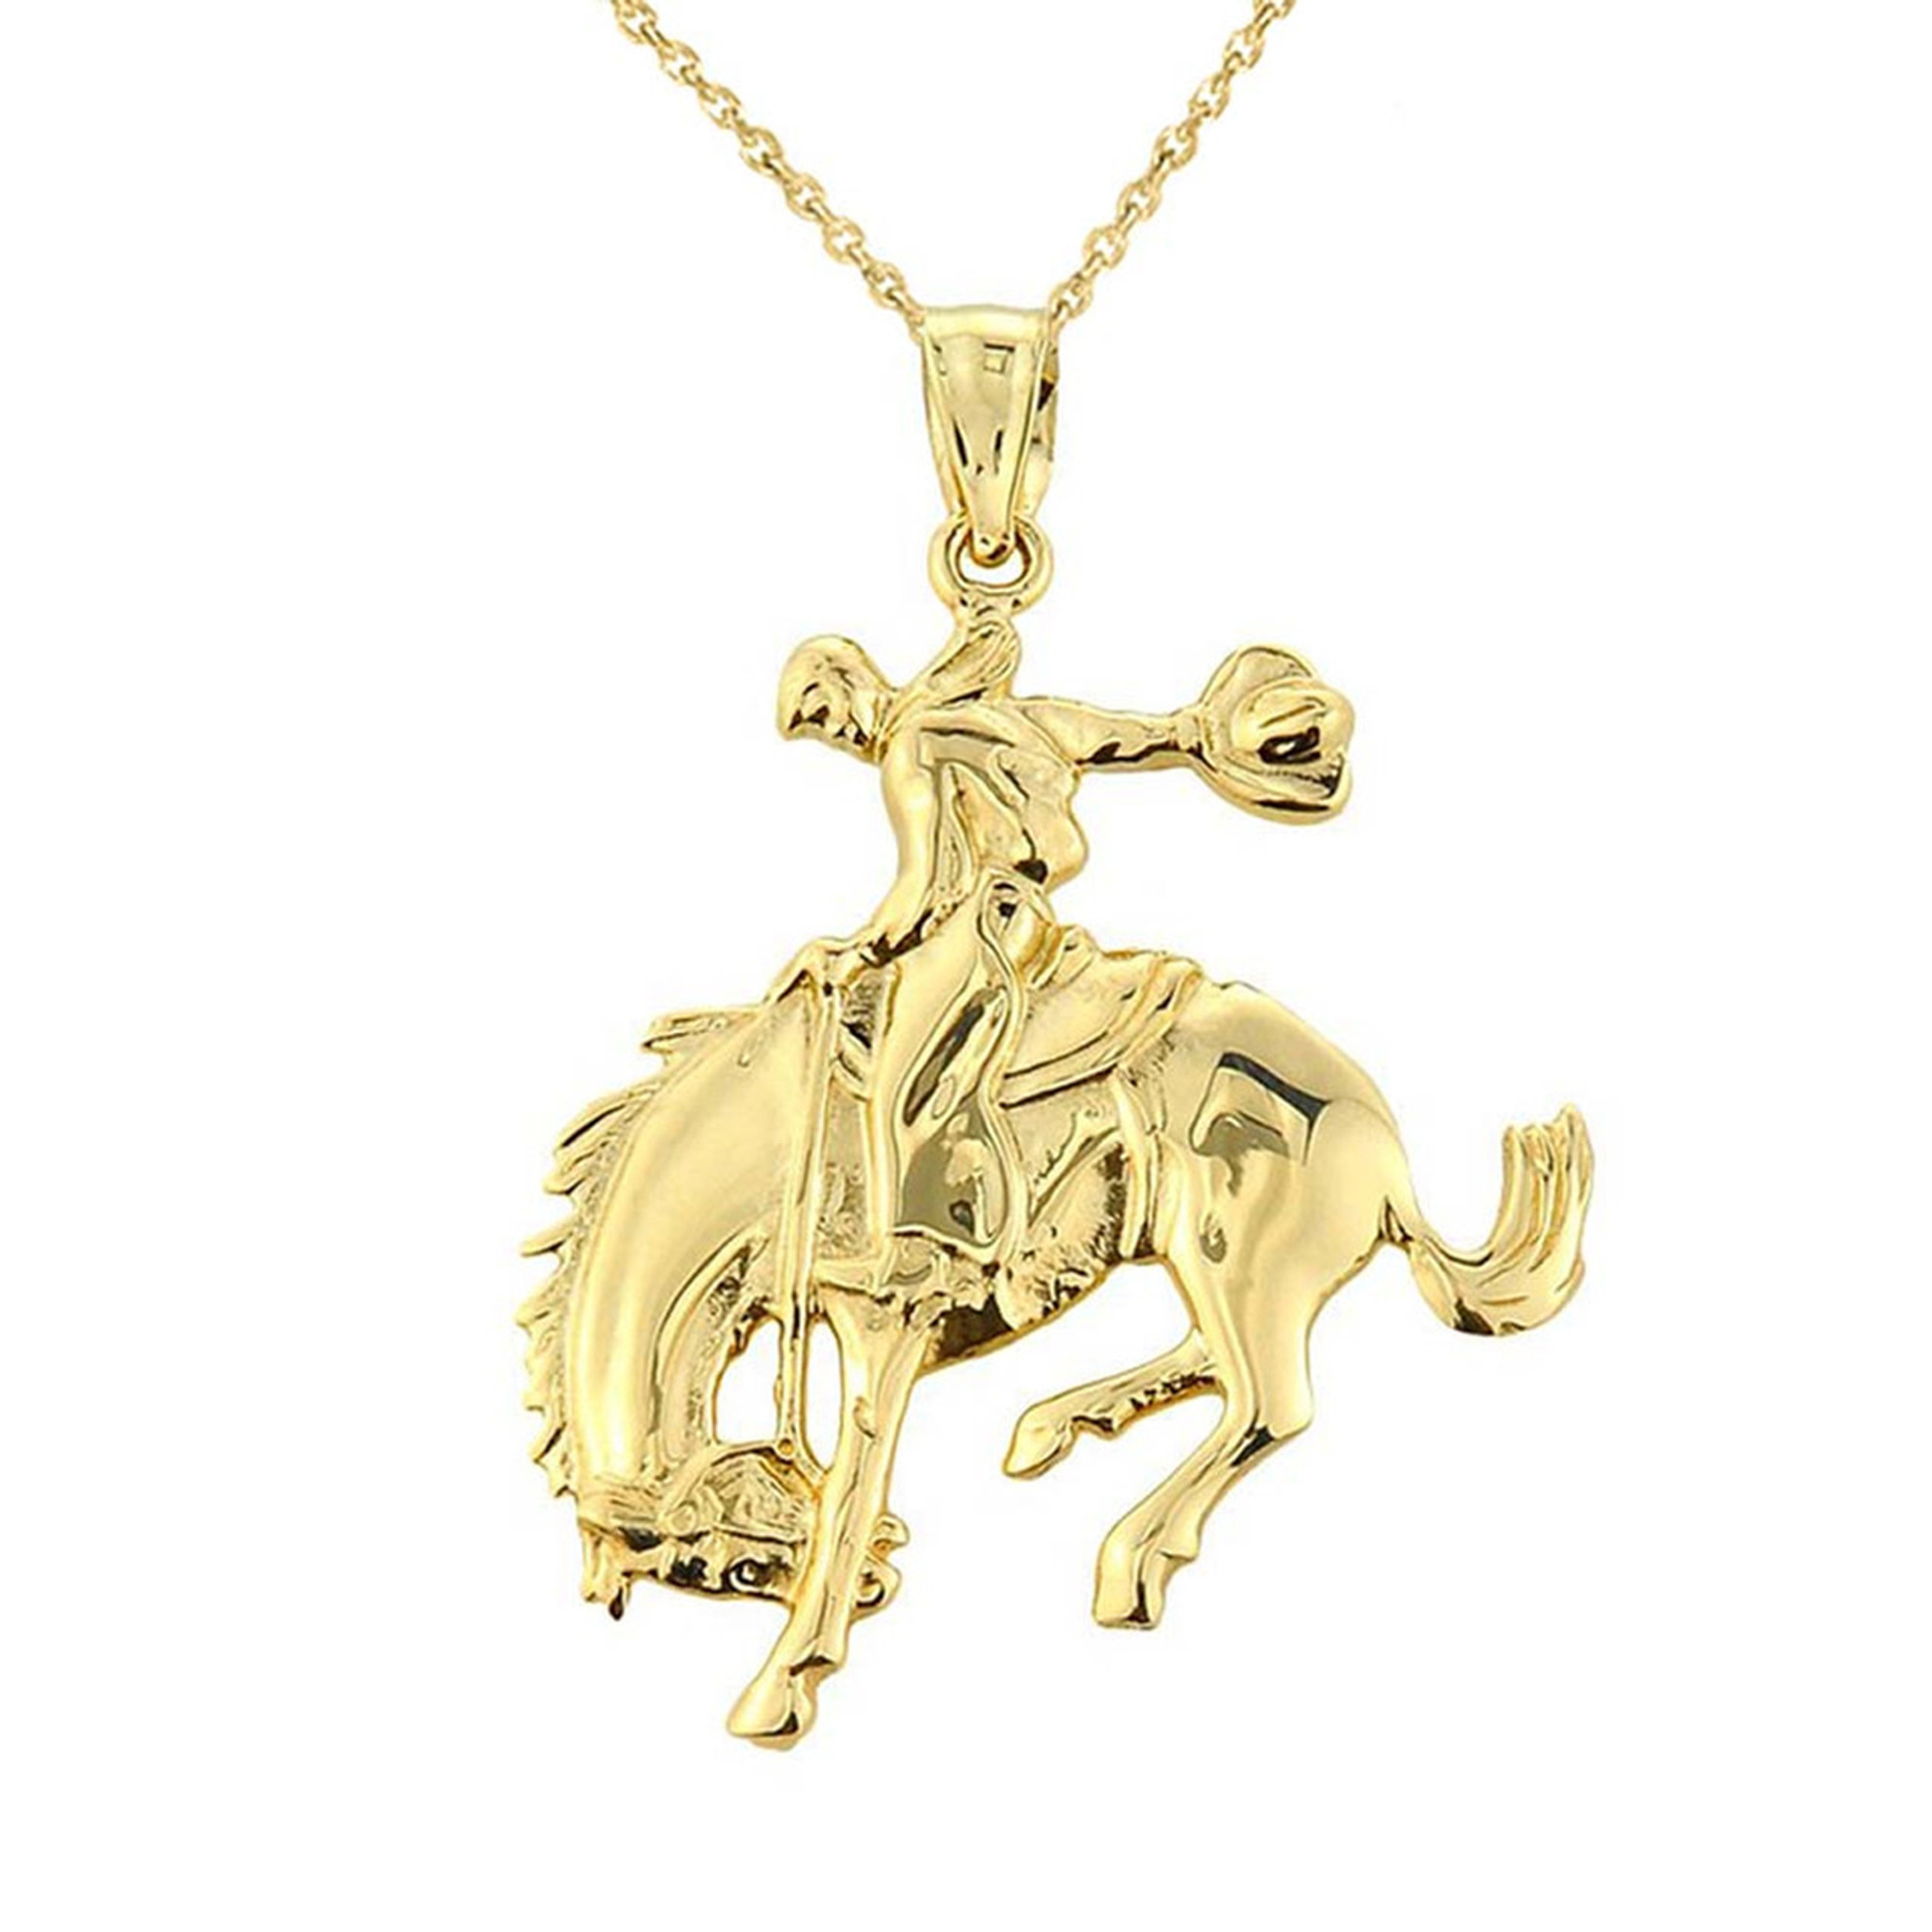 Rack Jack Pendant for Girls Unicorn Magical Pony Horse Charm Pendant  Necklace with Plated Chain - Gold Colour